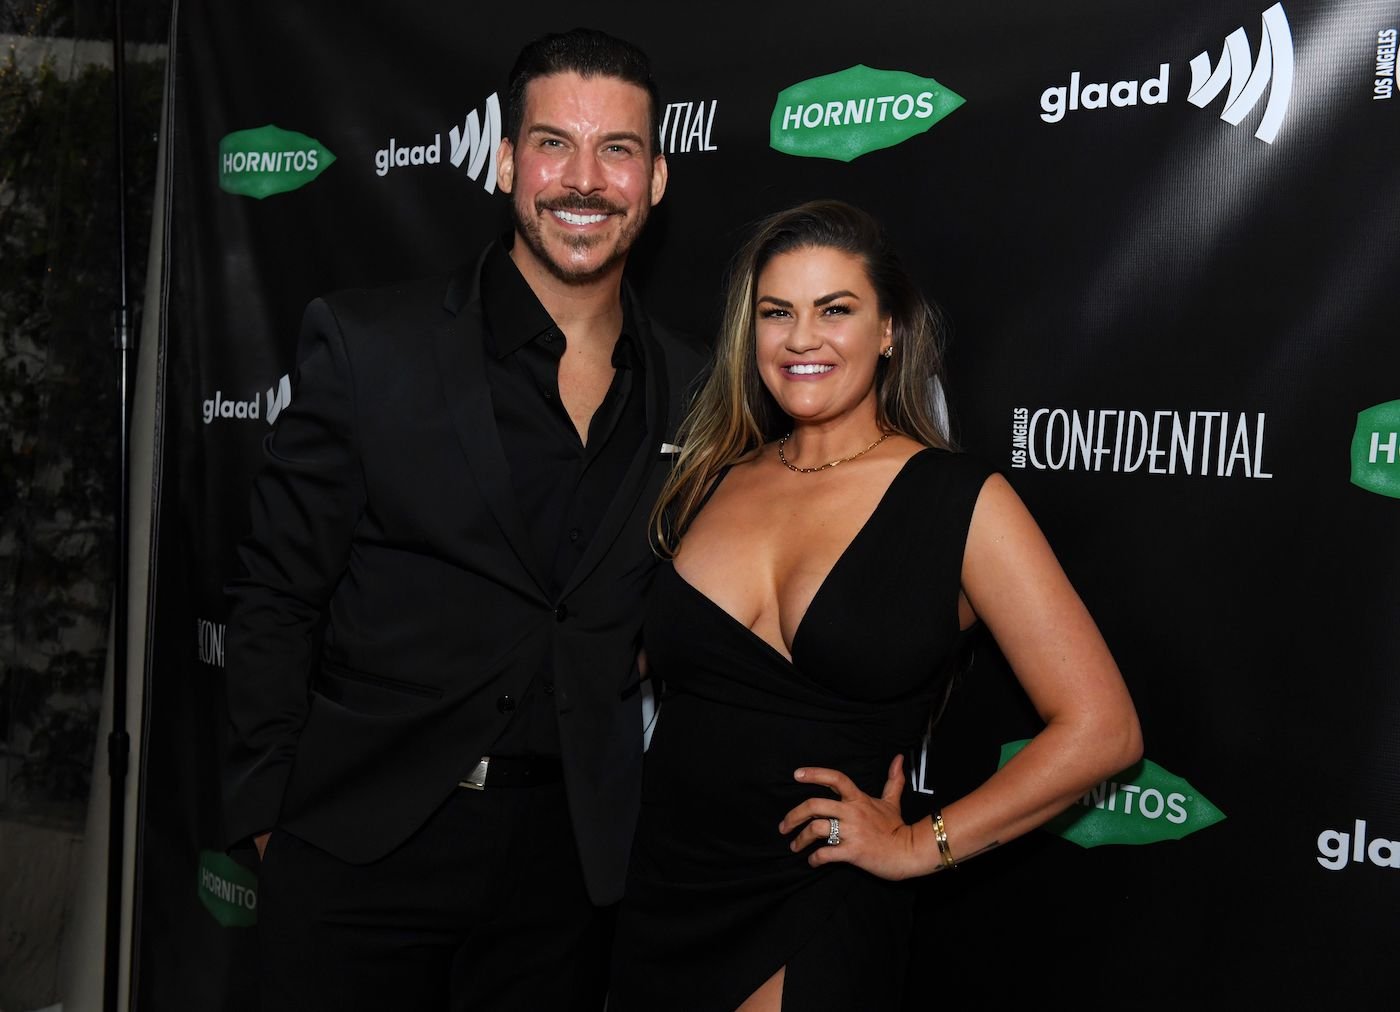 Jax Taylor and Brittany Cartwright from 'Vanderpump Rules' appeared on the red carpet during an event